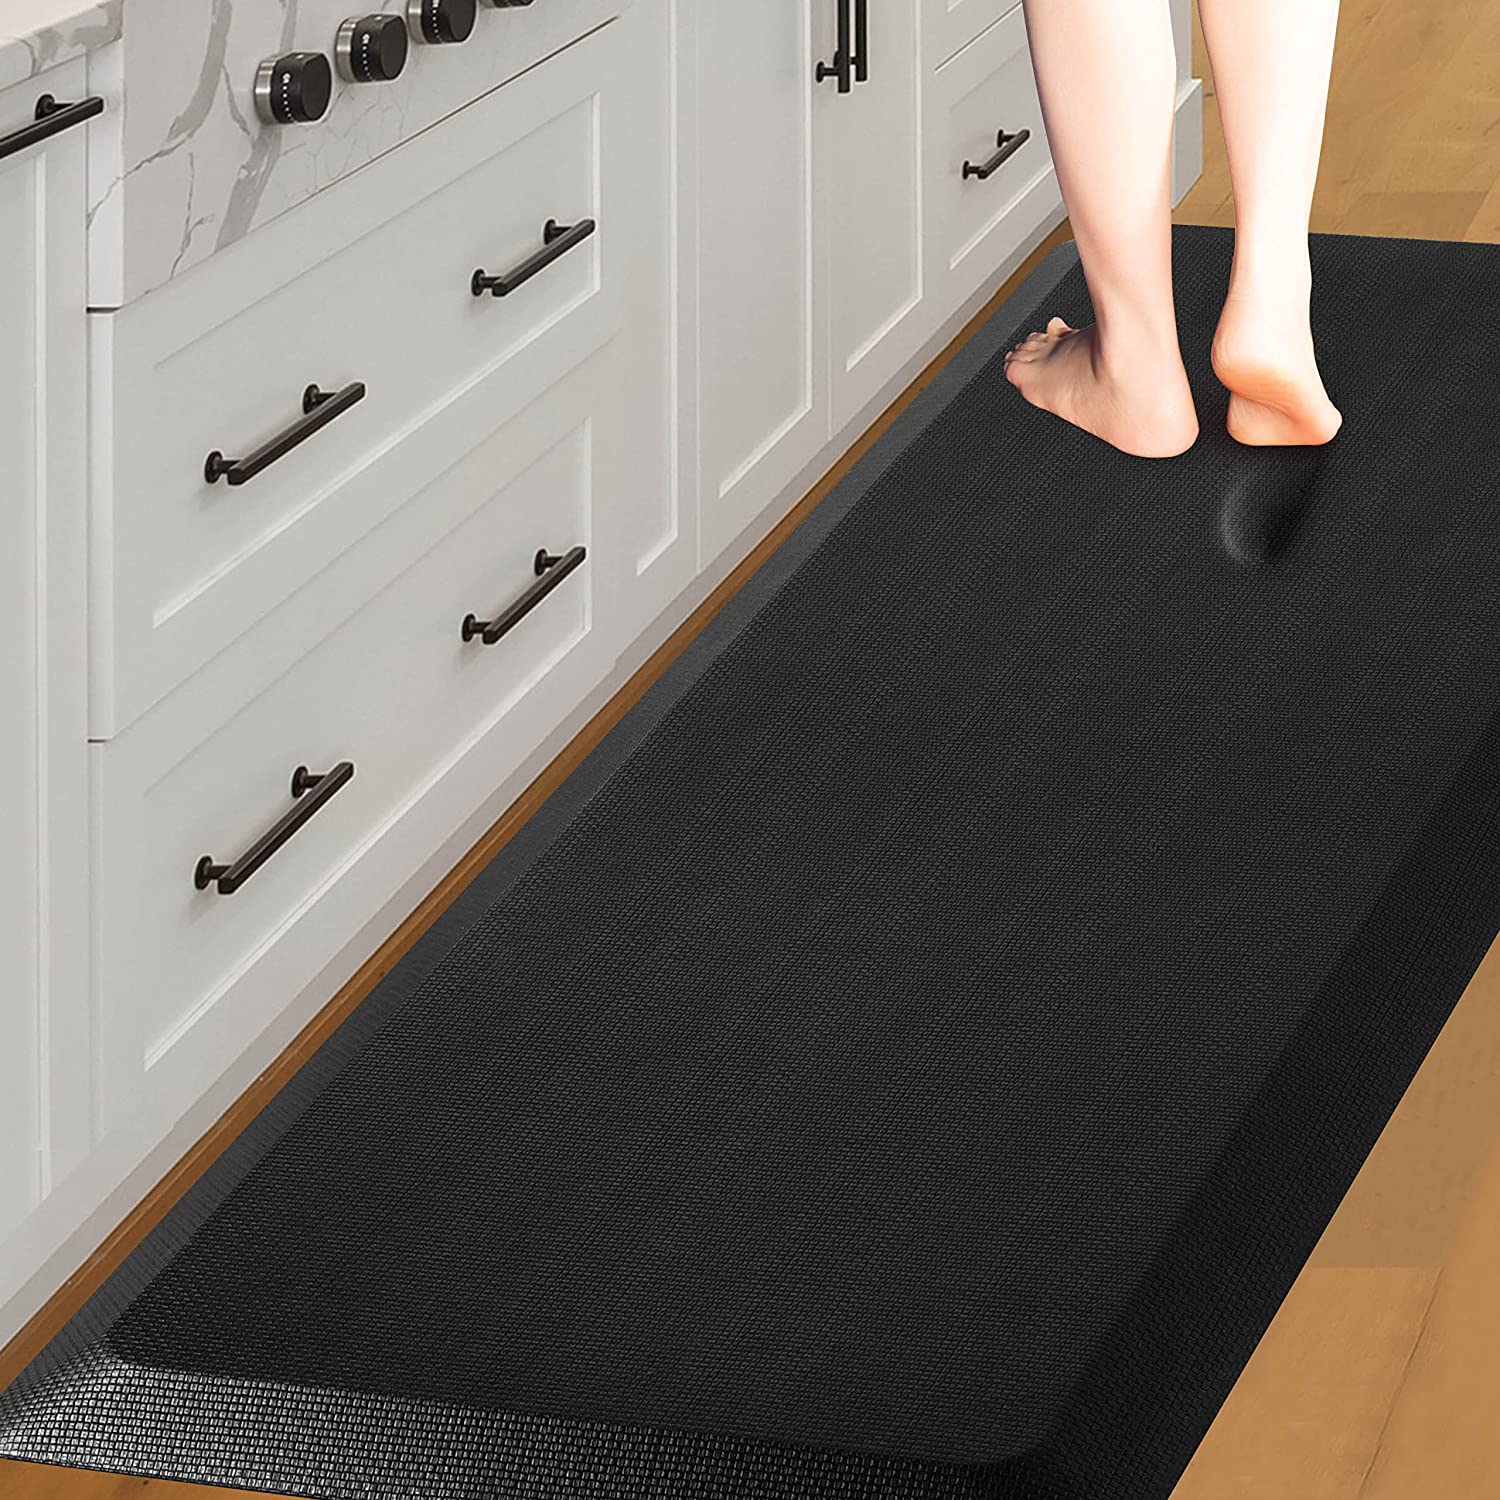 HEALEG The Original 1 inch Thick Comfort Anti Fatigue Floor Mat, Perfect for Kitchens and Standing Desks (Black, 20x30x1-Inch)